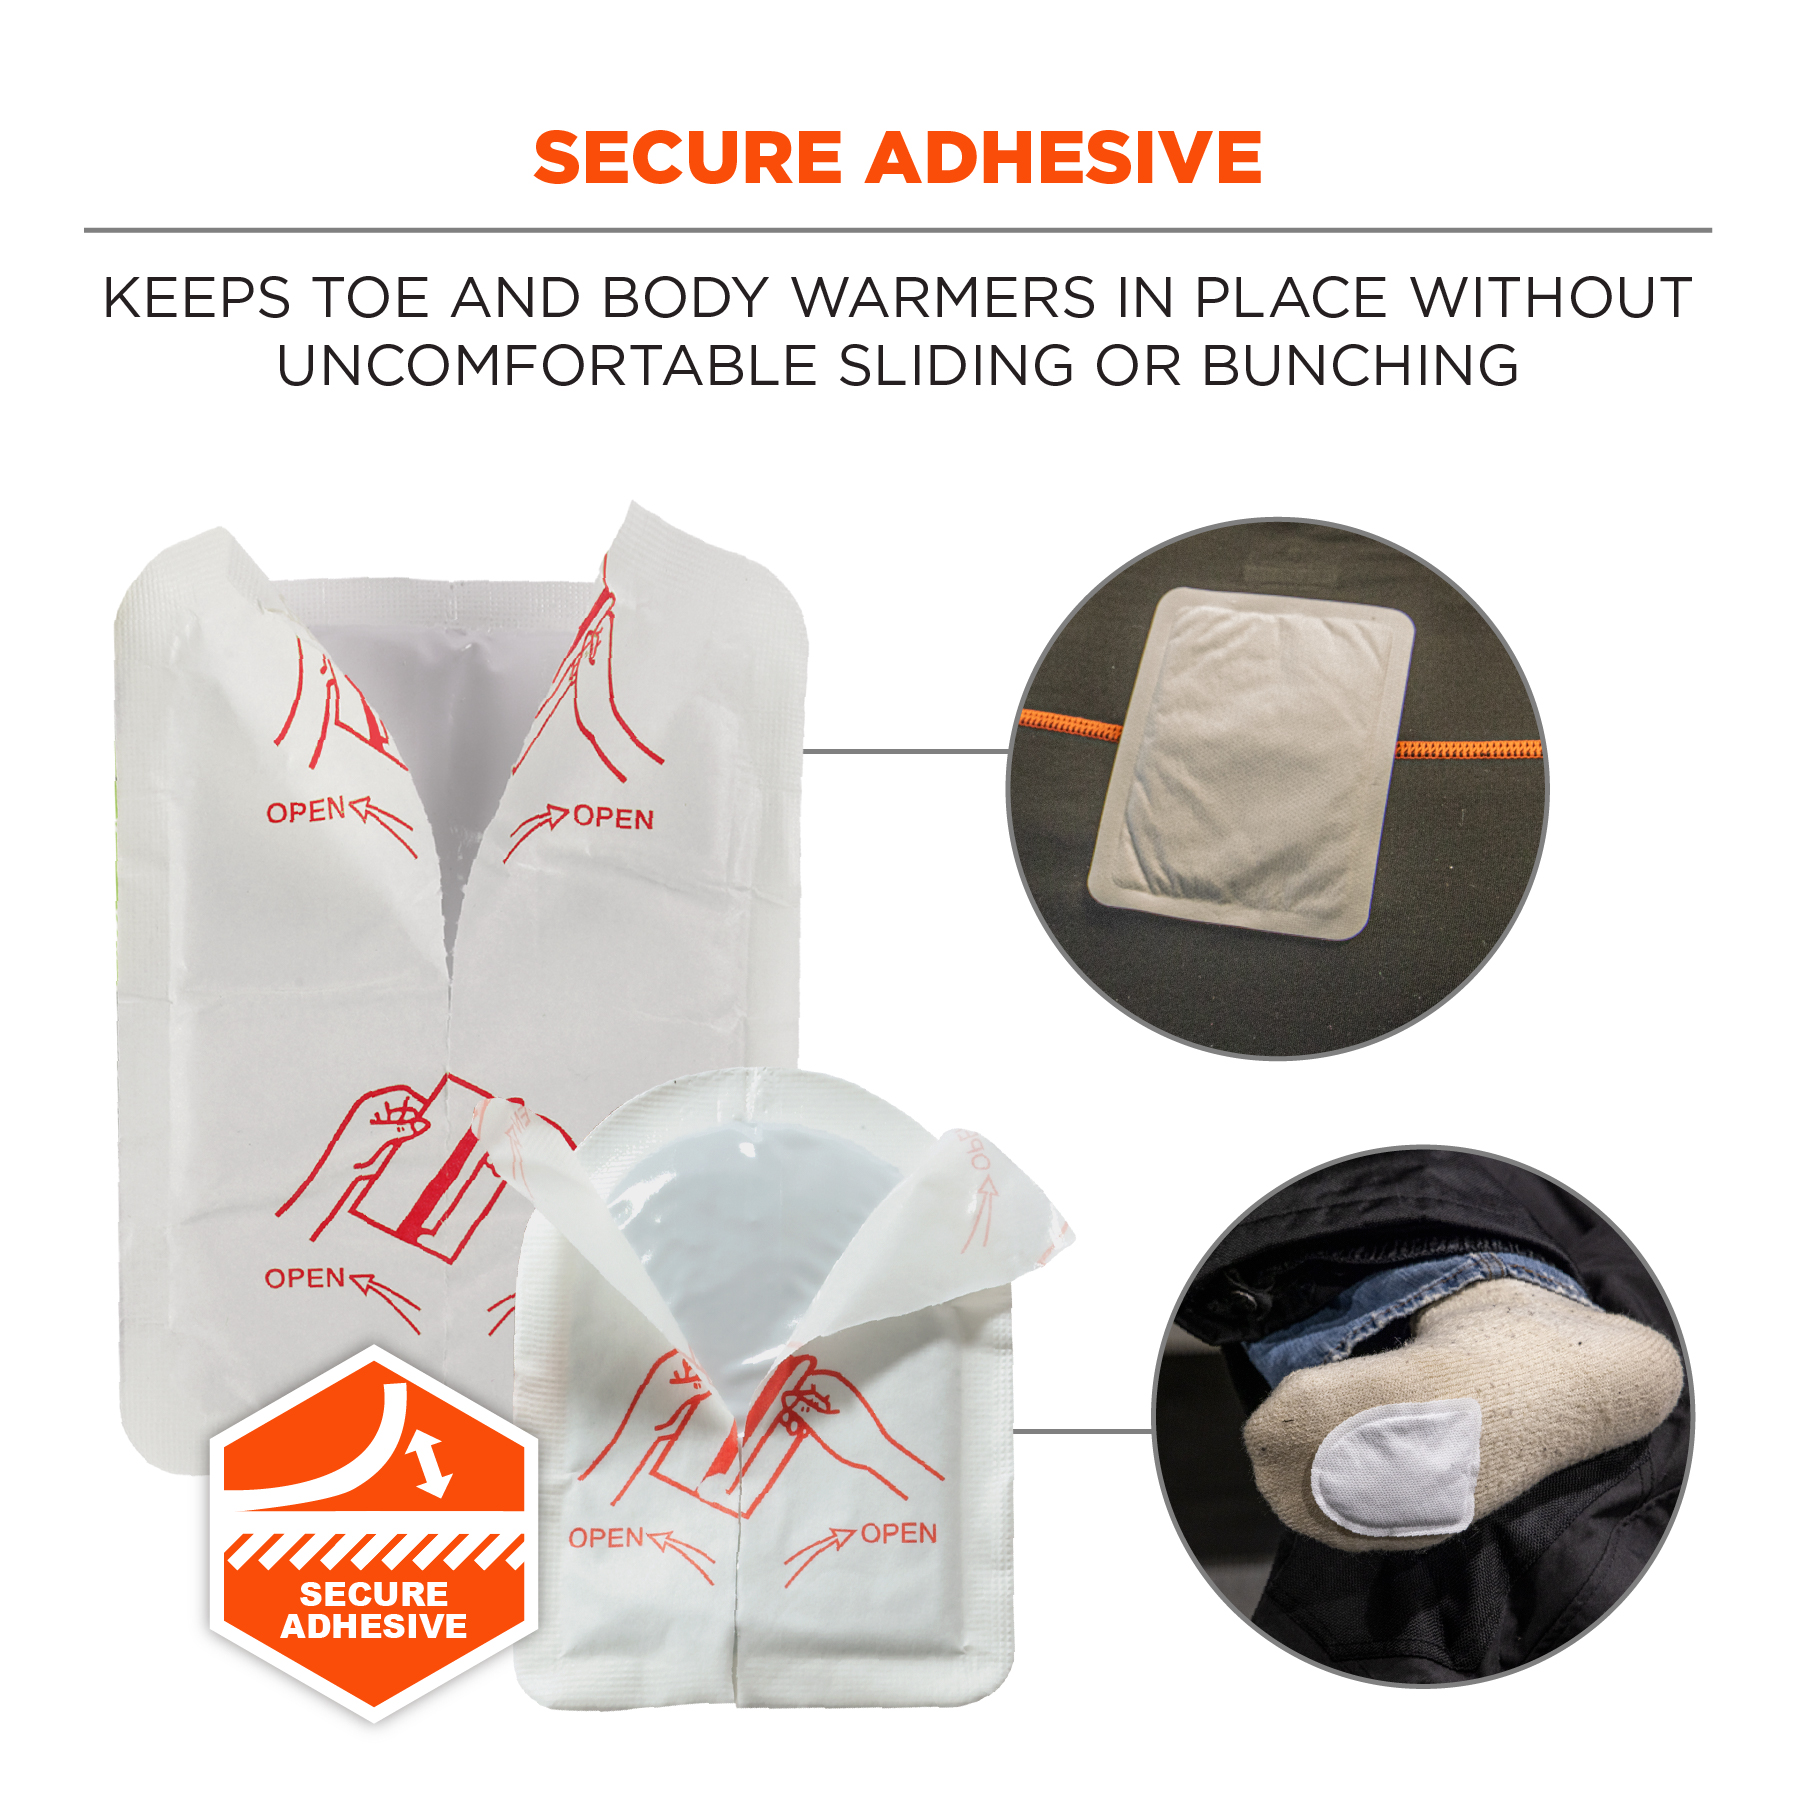 16994-6994-body-warmer-variety-pack-secure-adhesive